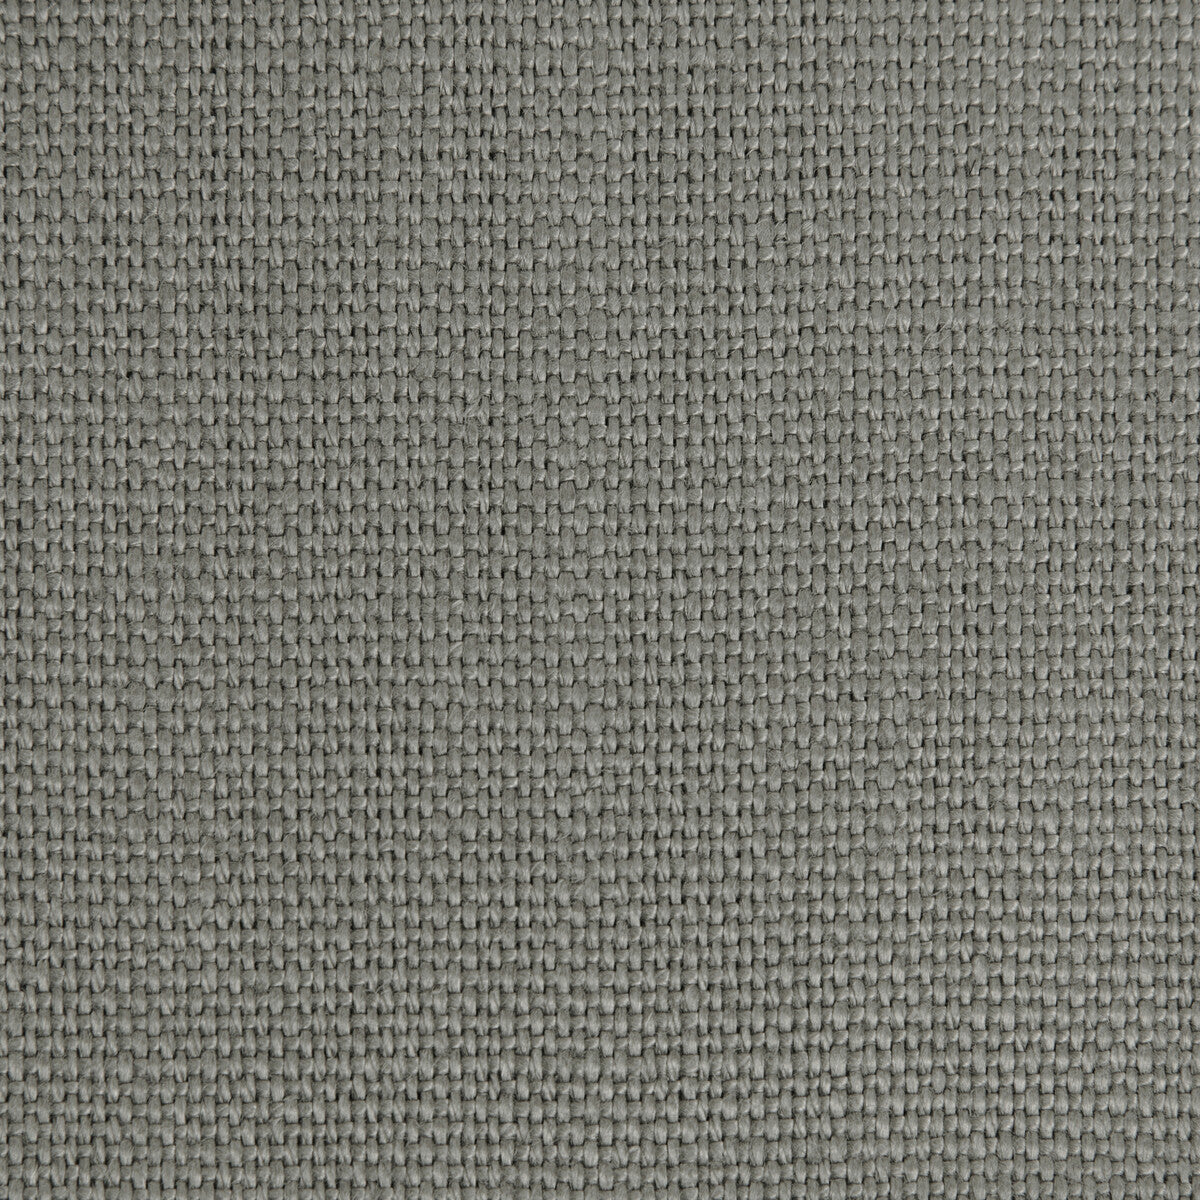 Stone Harbor fabric in lilac color - pattern 27591.2100.0 - by Kravet Basics